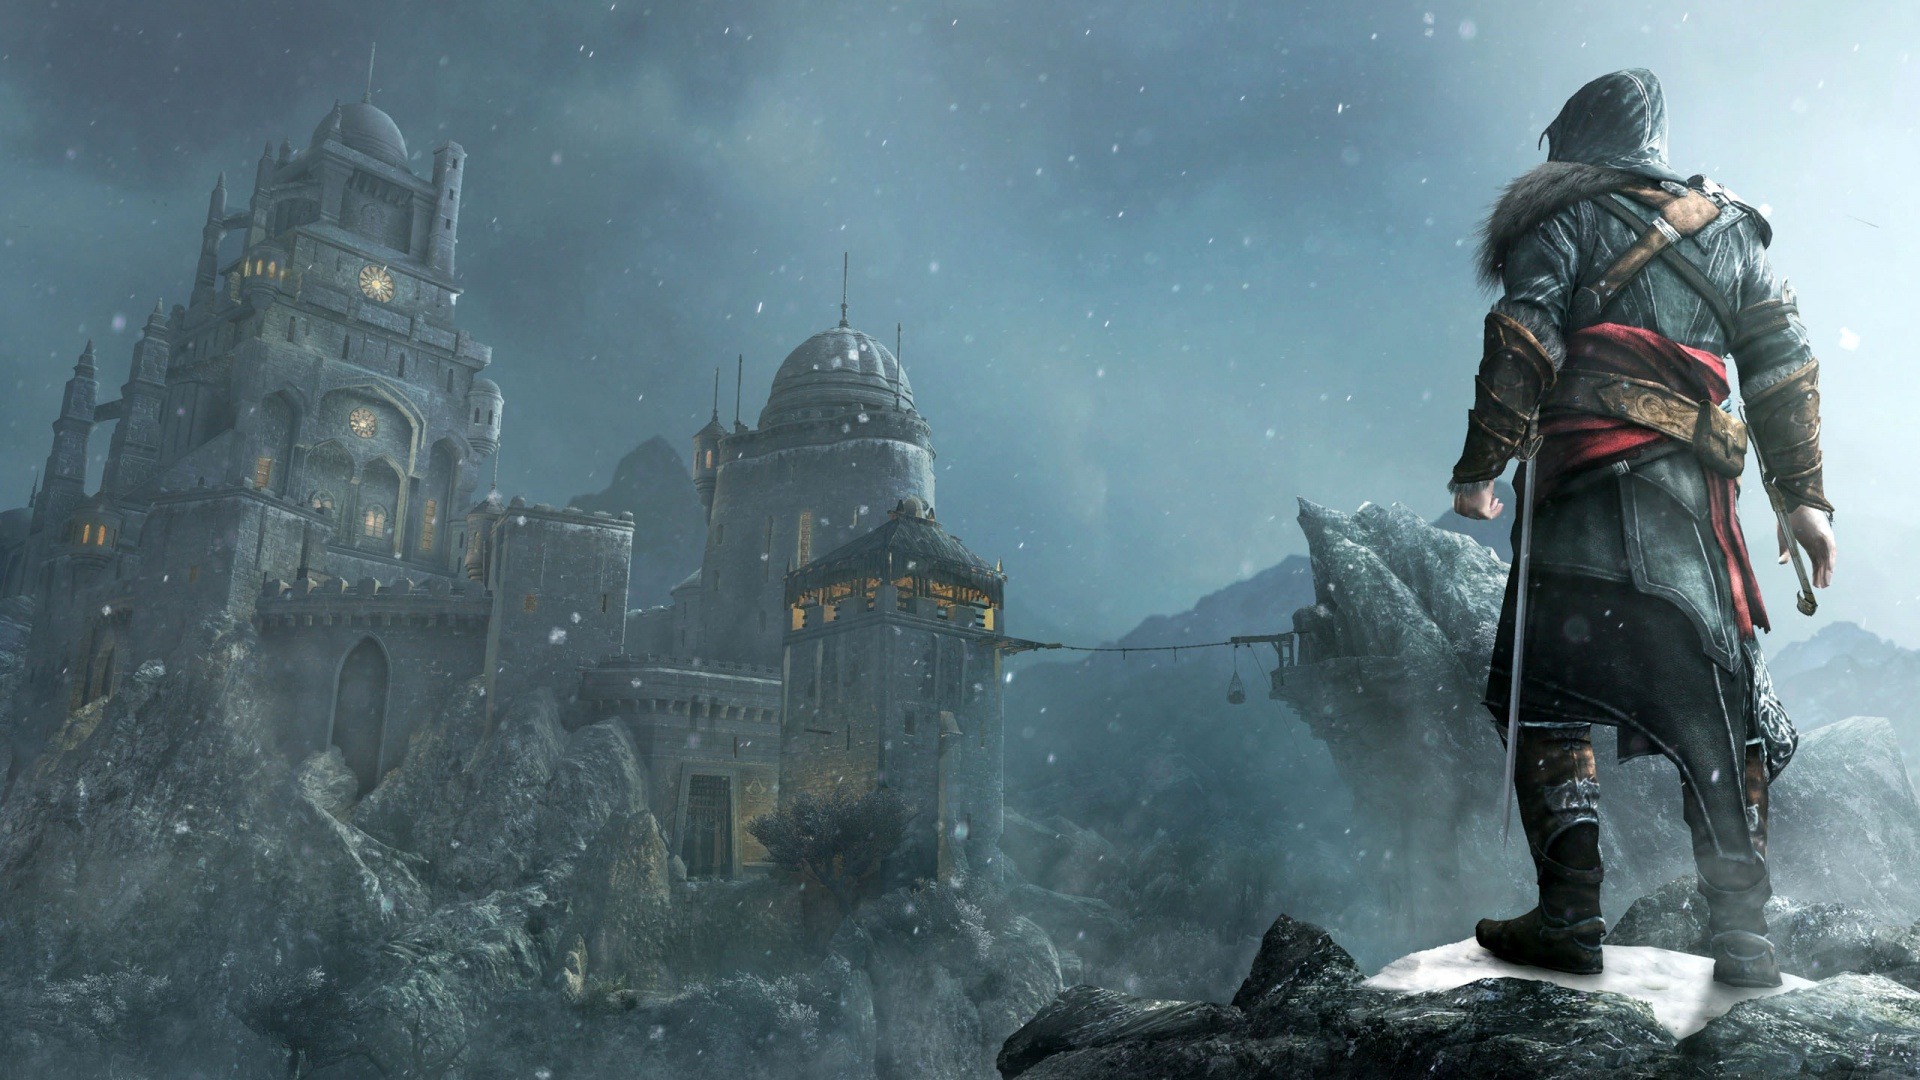 assassinand039s, Creed, Snow, Fantasy, Warrior, Weapons, Sword, Castle Wallpaper